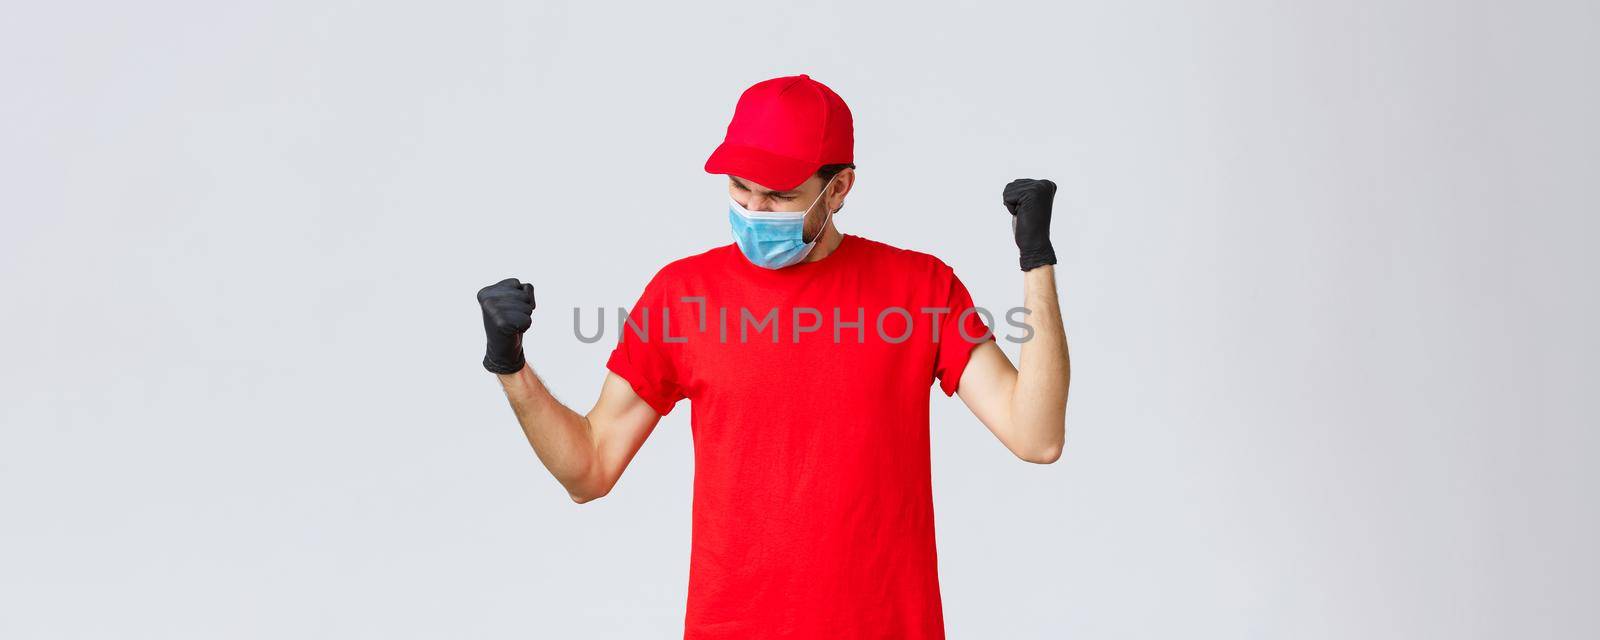 Covid-19, self-quarantine, online shopping and shipping concept. Encouraged and confident delivery man fist pump, feel empowered and happy, fist pump yell yes, accomplish goal, wear face mask.